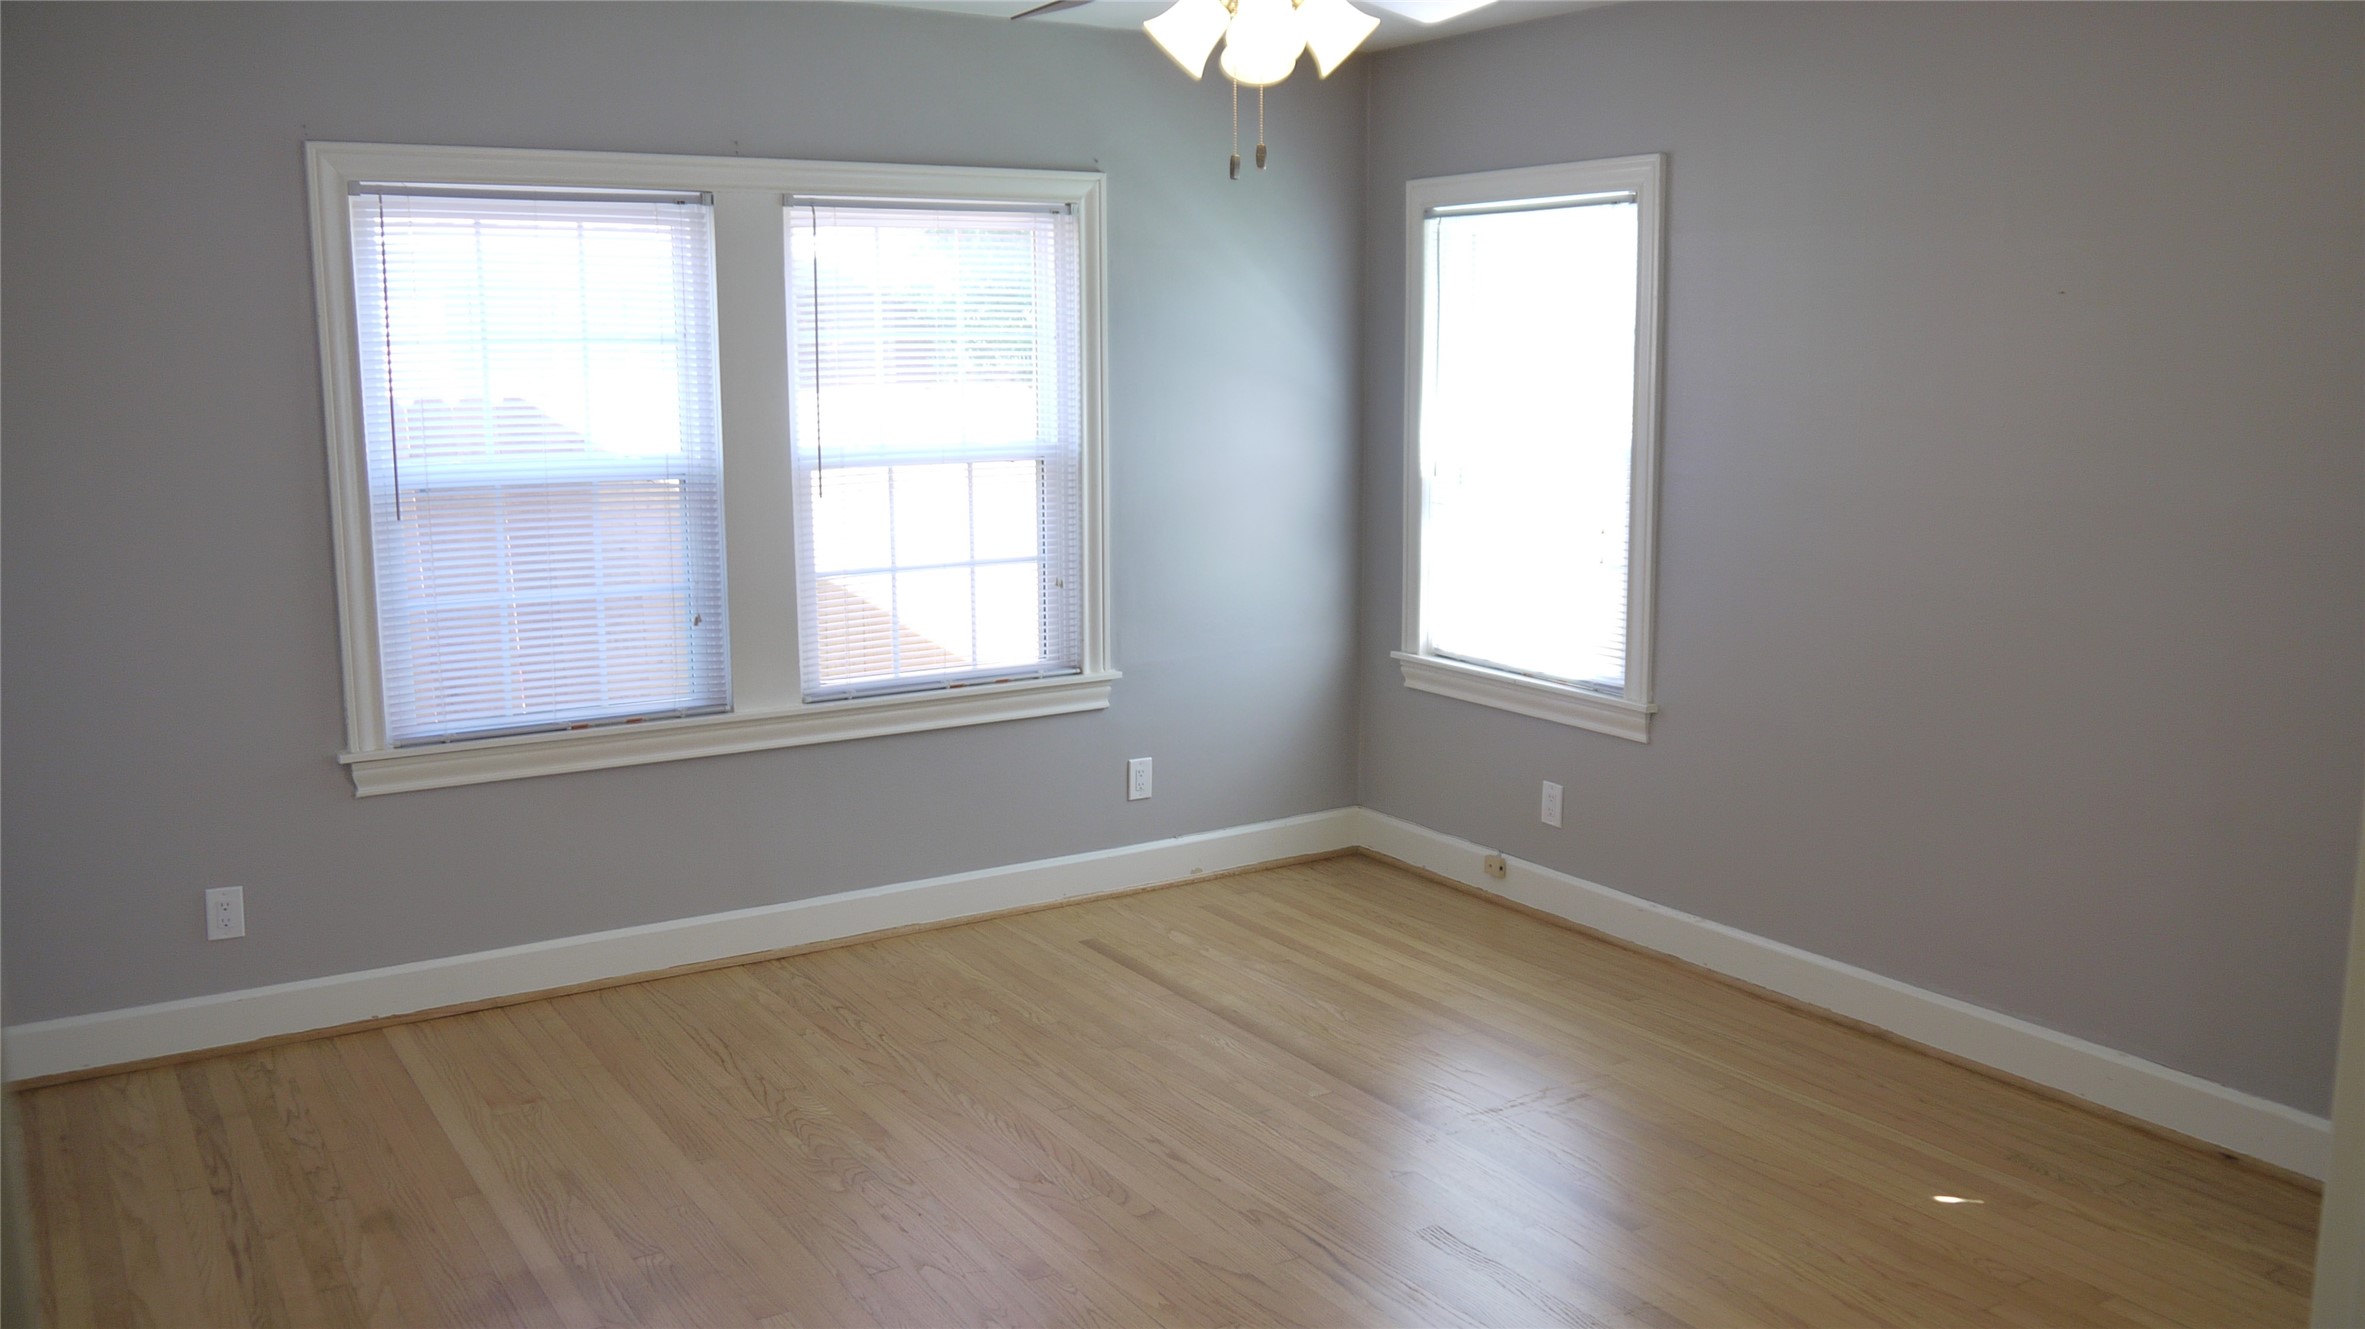 Your back bedroom with an abundance of windows and again the nicely redone hardwoods.